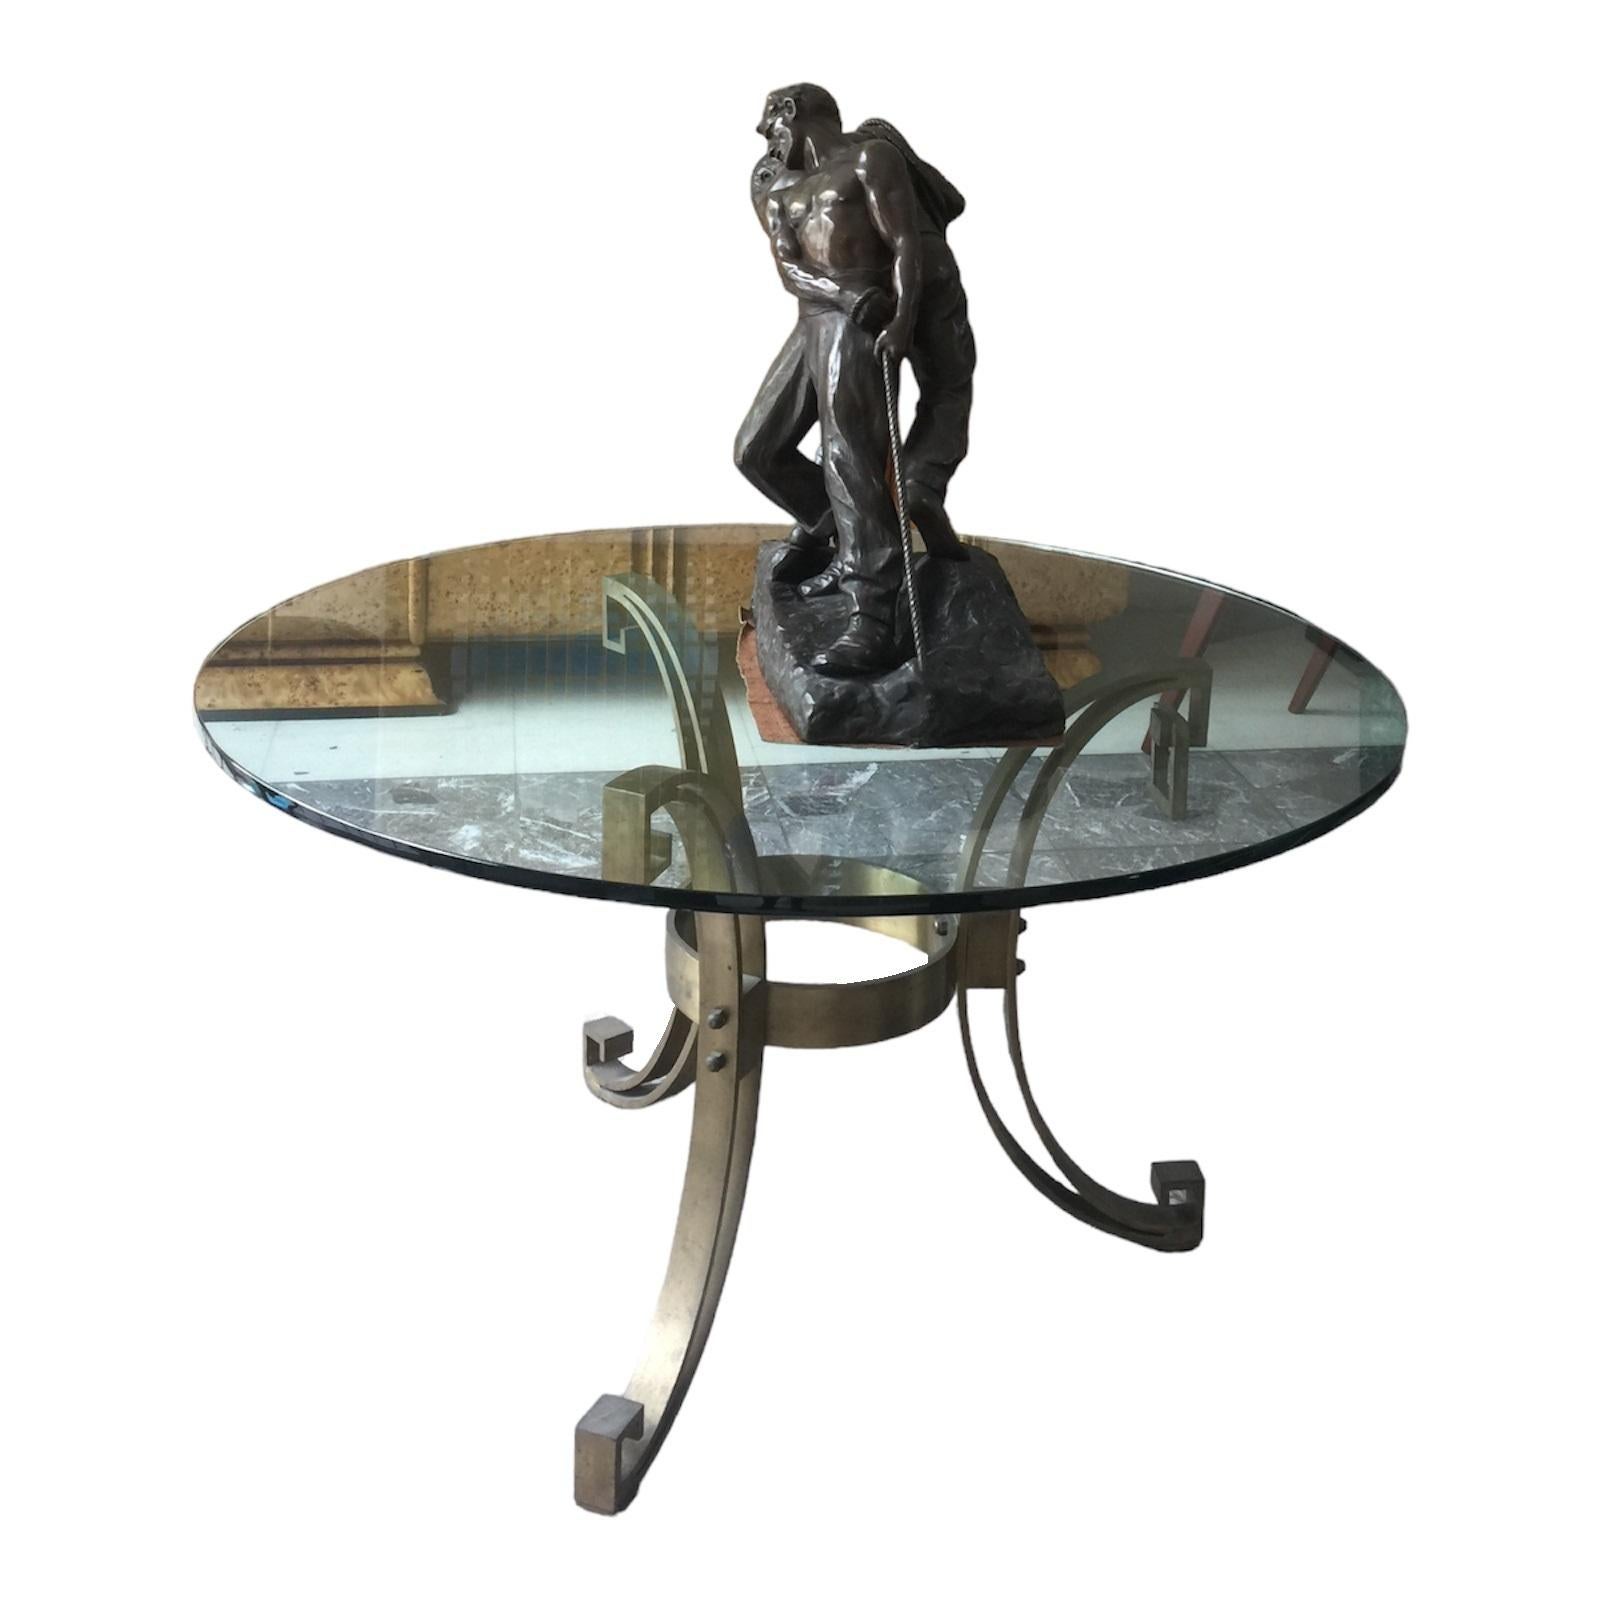 Center Table, Style: Art Deco , Materials: Solid Bronze and Glass, French, 1920 For Sale 16